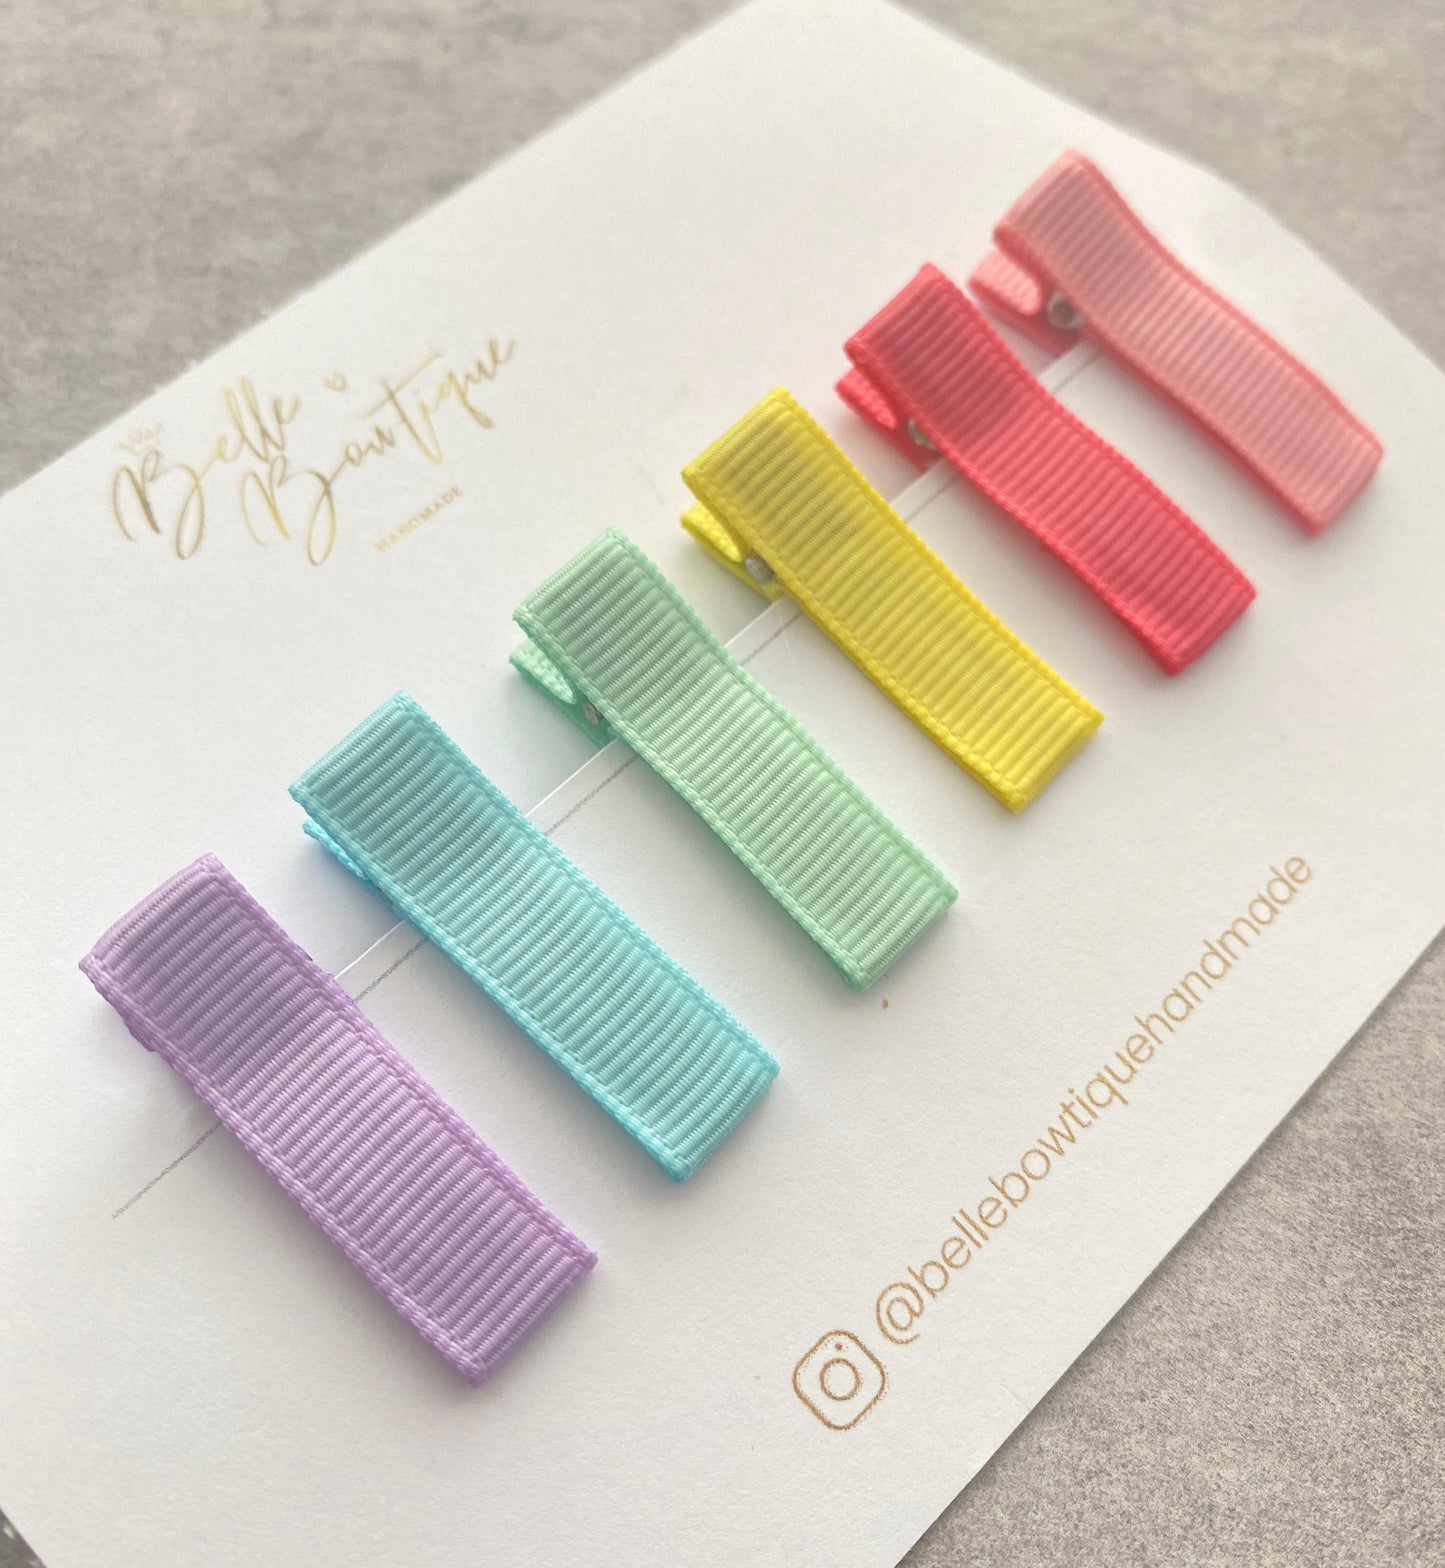 Rainbow Ribbon Fringe Clips Pack of 6 - - Small Clips - Mini Clips - Clip Pack - Baby Hair Clips - Toddler Hair Clips - Lined hair clip